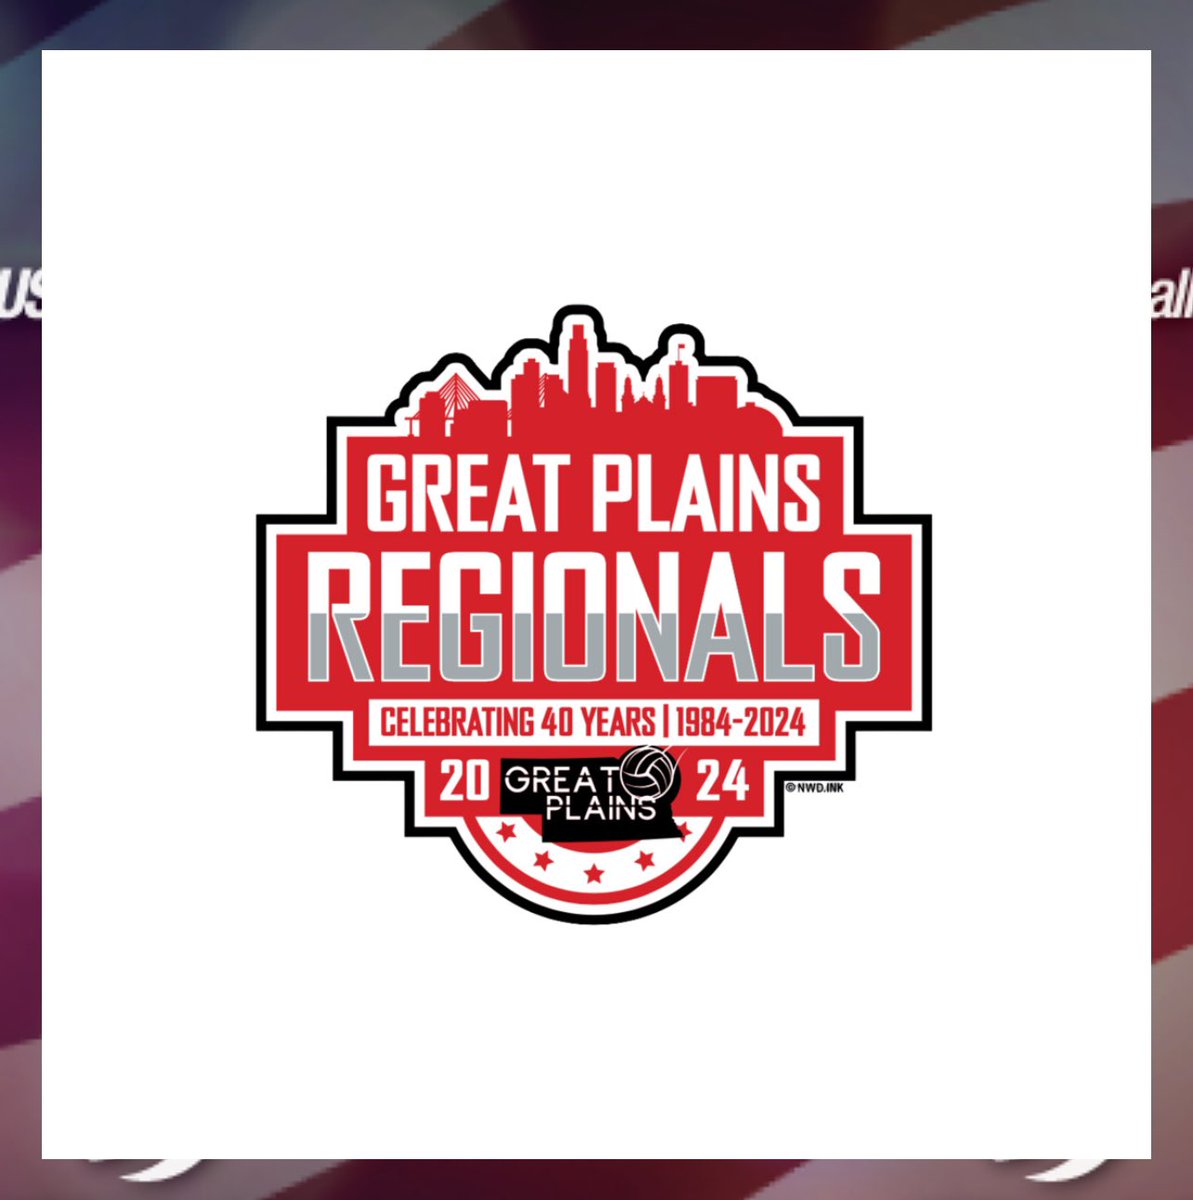 Goodluck to all of our teams competing in the 2024 @GreatPlainsVB Regional Championships this weekend at CHI! #GPVB #USAV #TopFlightFAM